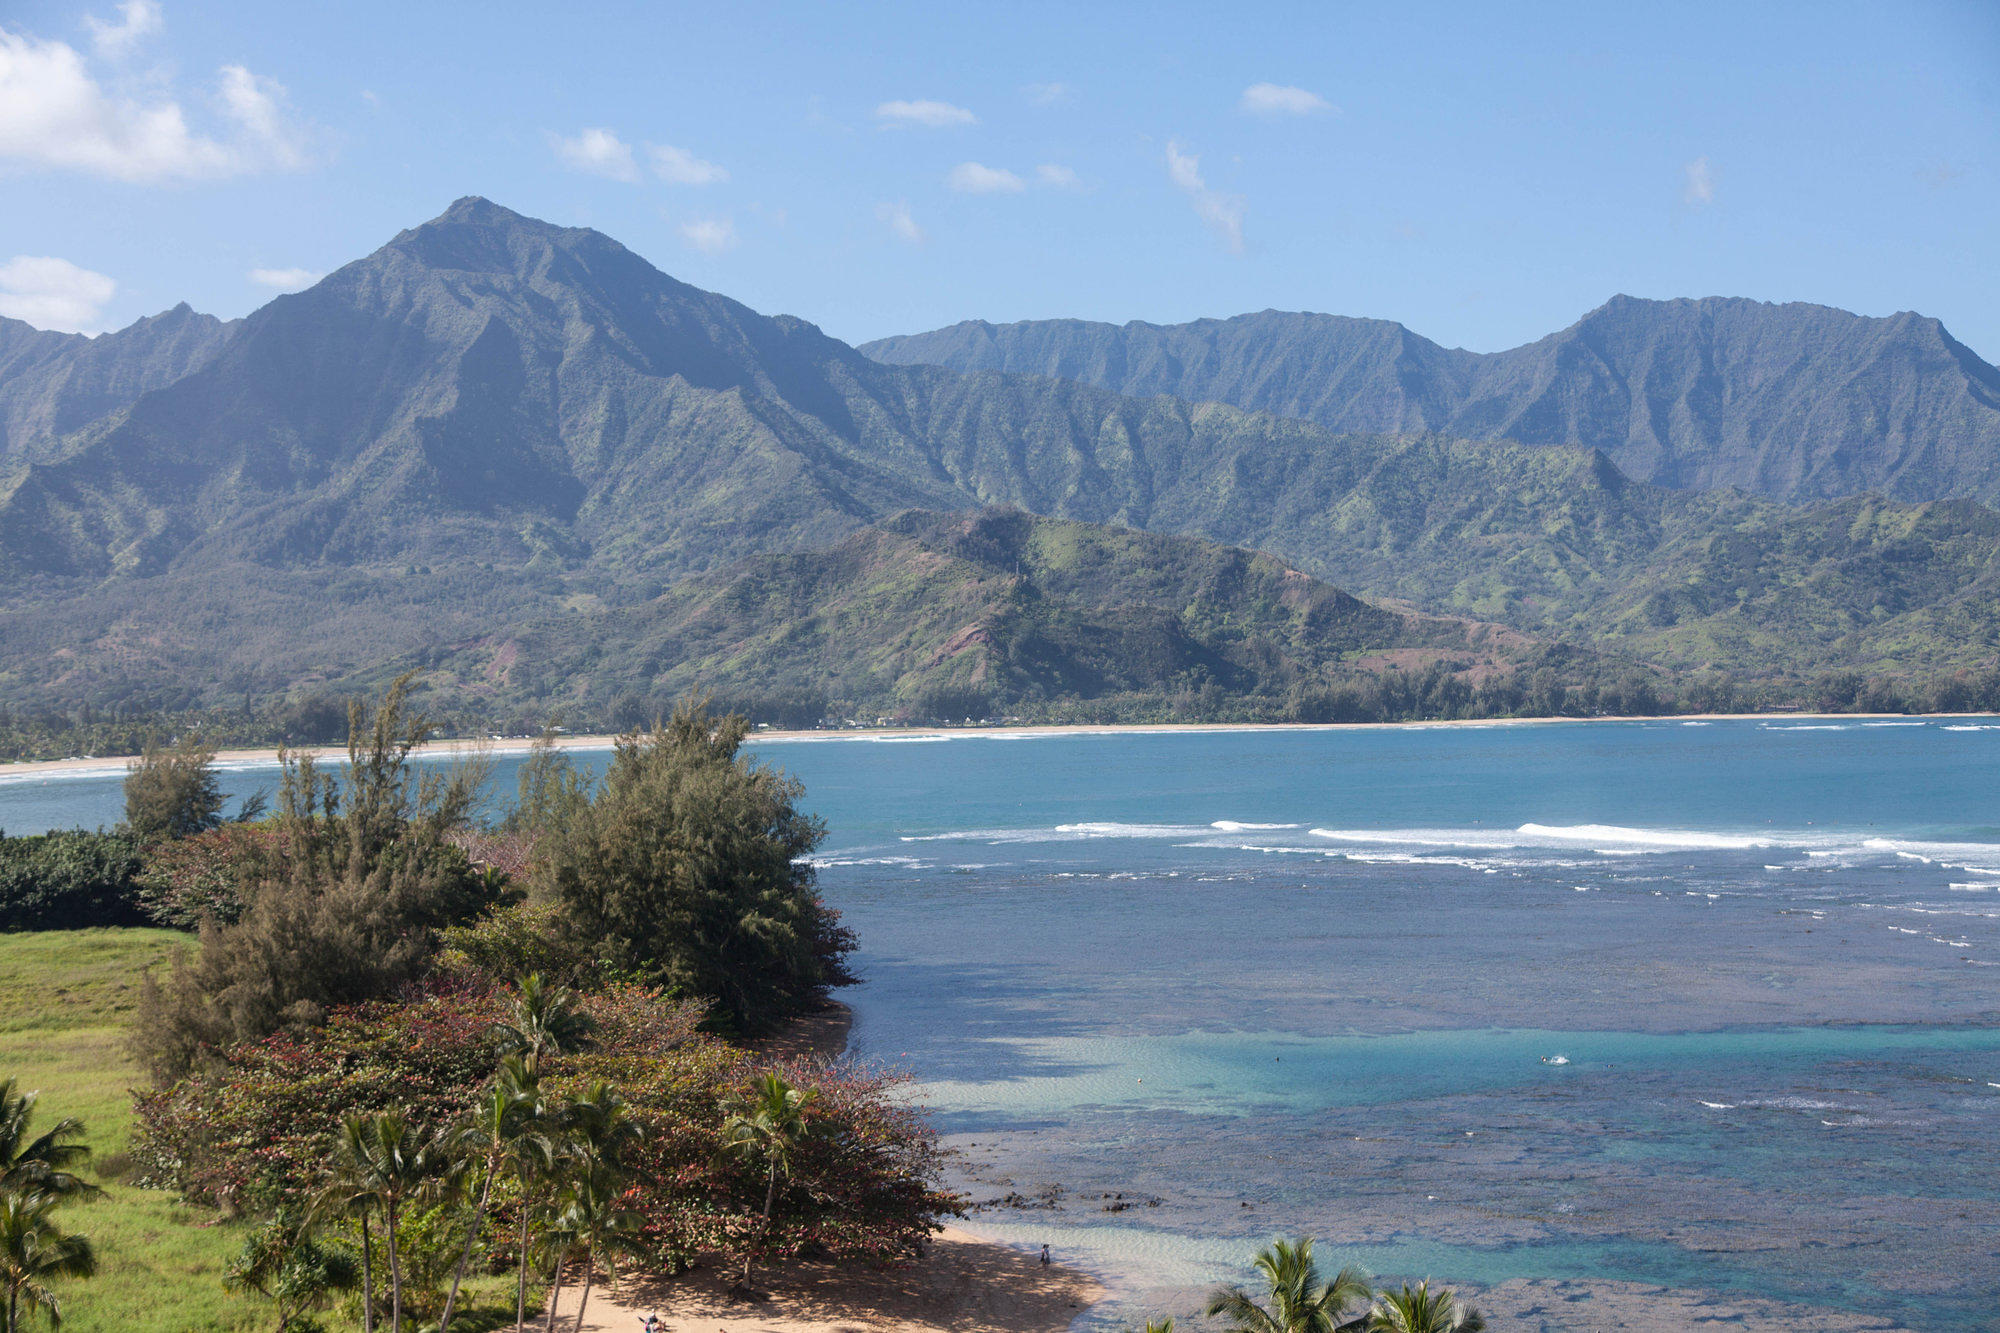 The view over Hanalei Bay and mountains from the Princeville Resort